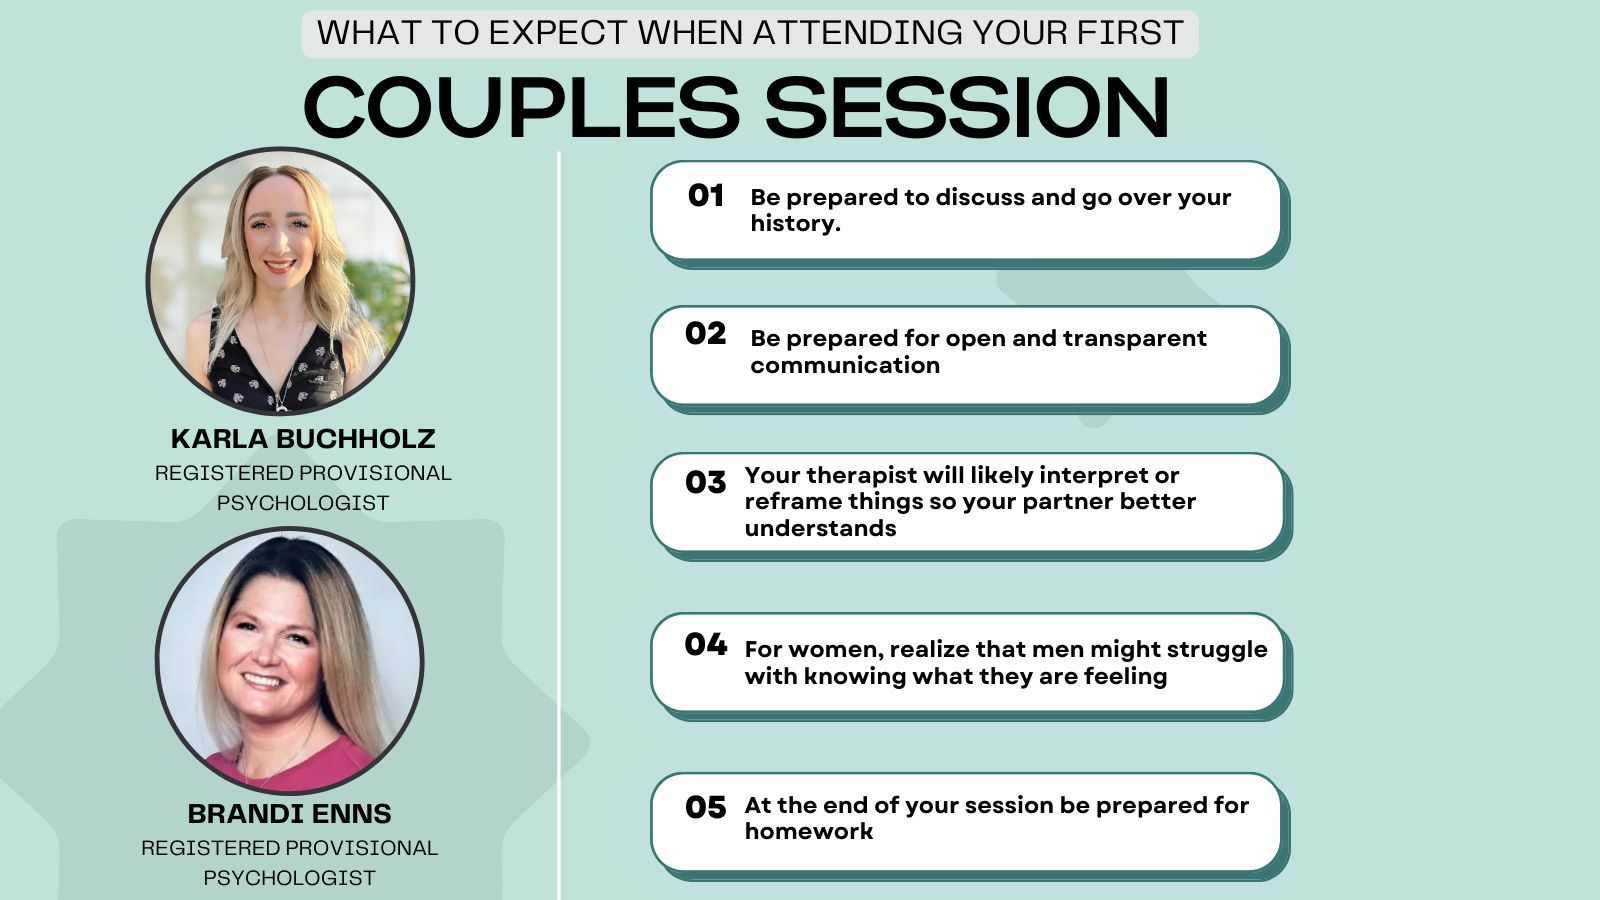 How to Prepare for Couples Counseling: 7 Ways to Get Ready for Your First  Session